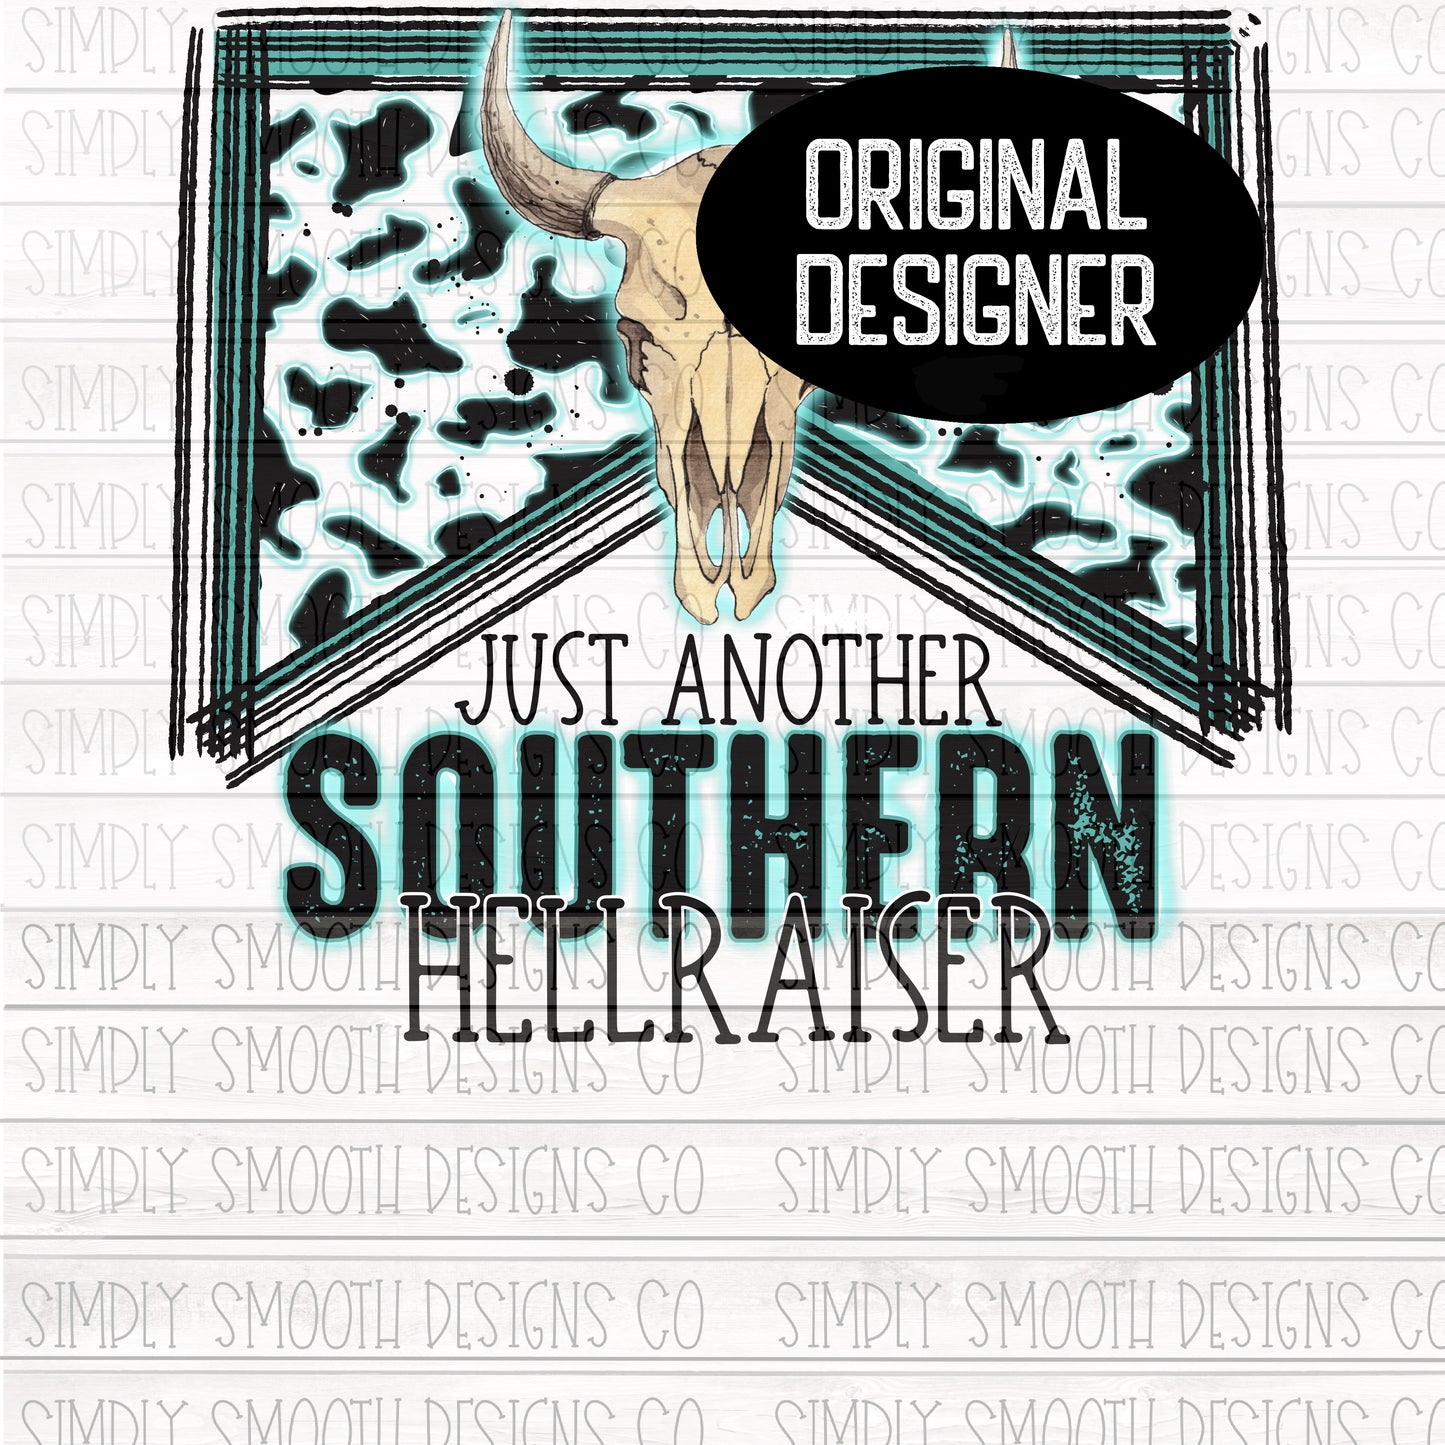 Just another southern hellraiser